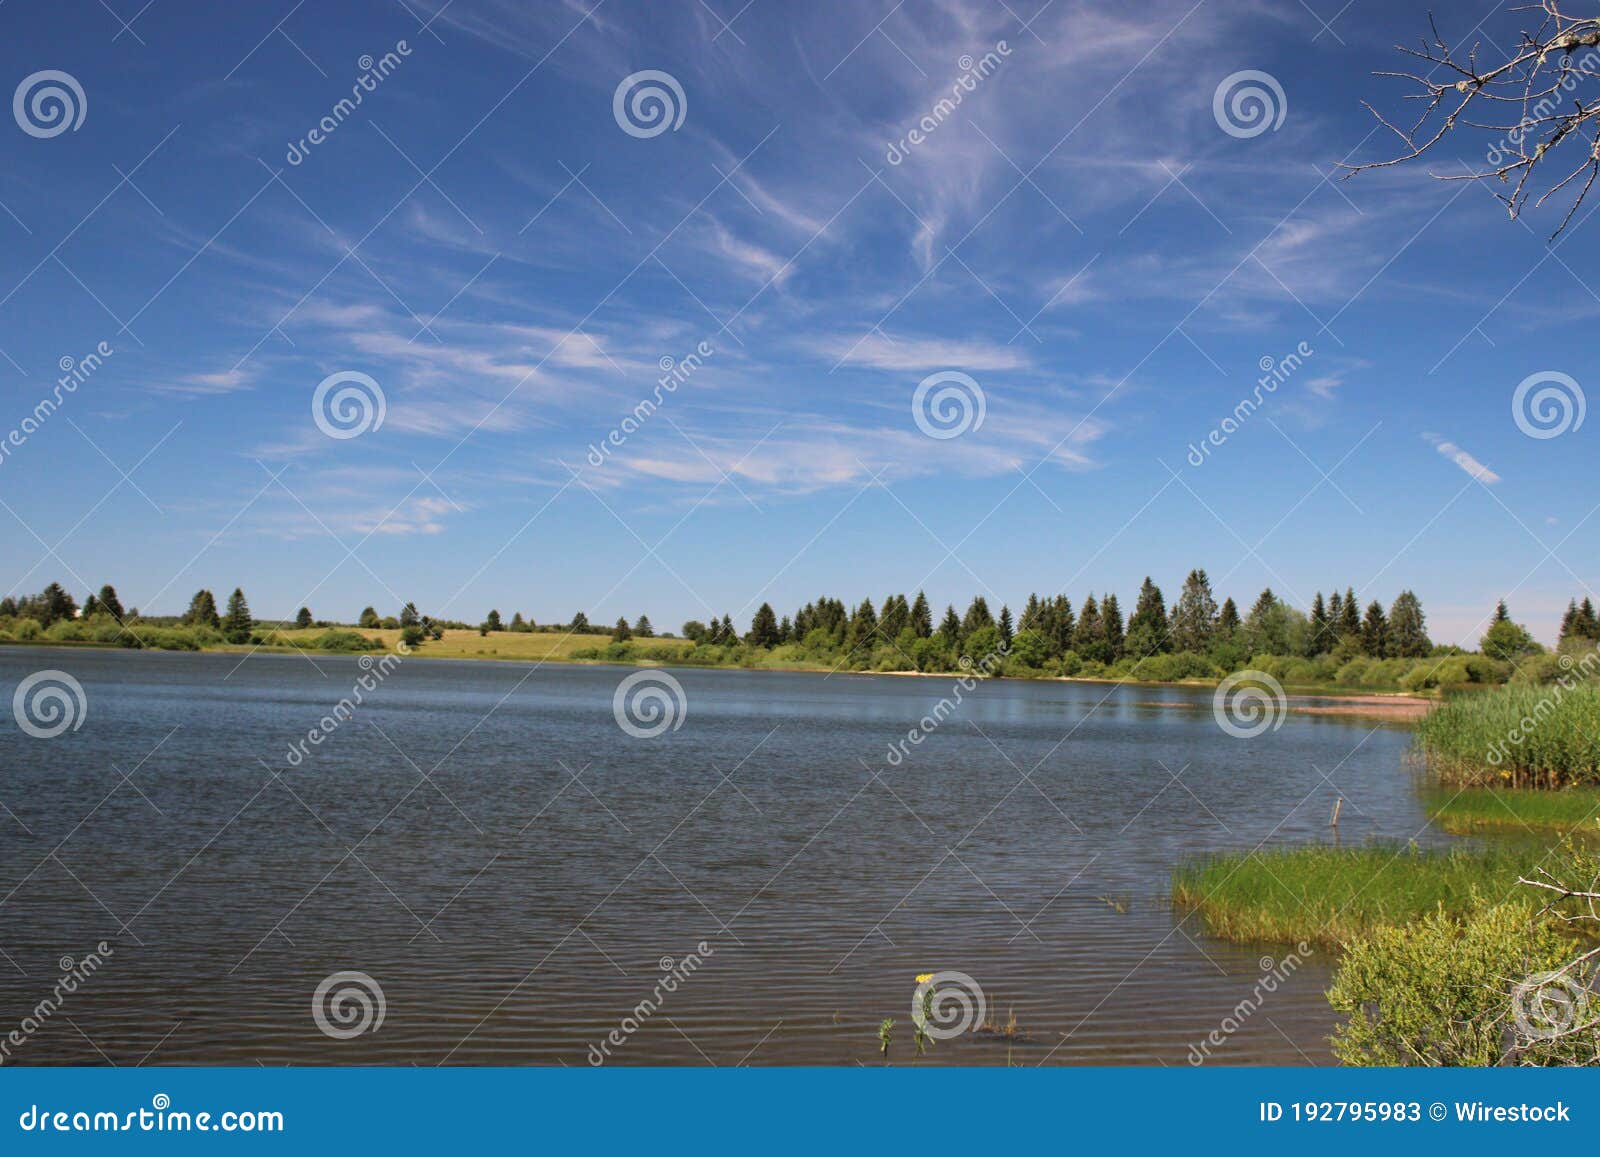 calm lake surrounded by greenery under a sunny sky in lac de l'entonnoir near the bouverans, france